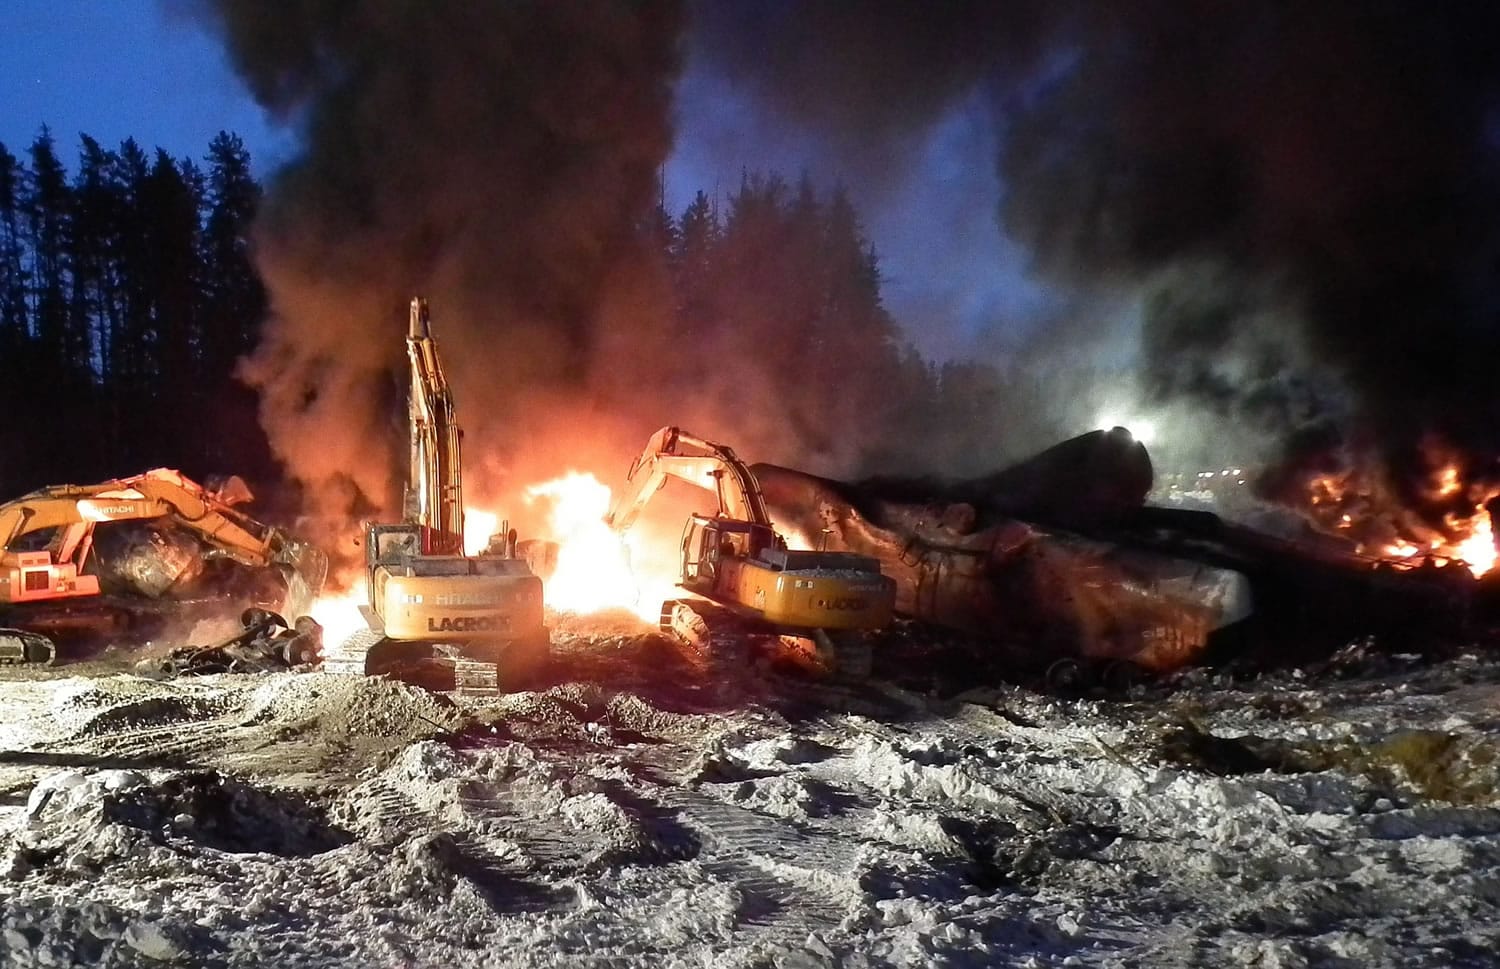 Transportation Safety Board of Canada files
Workers fight a fire Feb. 16 after a crude oil train derailment south of south of Timmins, Ontario. The train derailment this month suggests new safety requirements for tank cars carrying flammable liquids are inadequate, Canada's transportation safety board announced Monday.